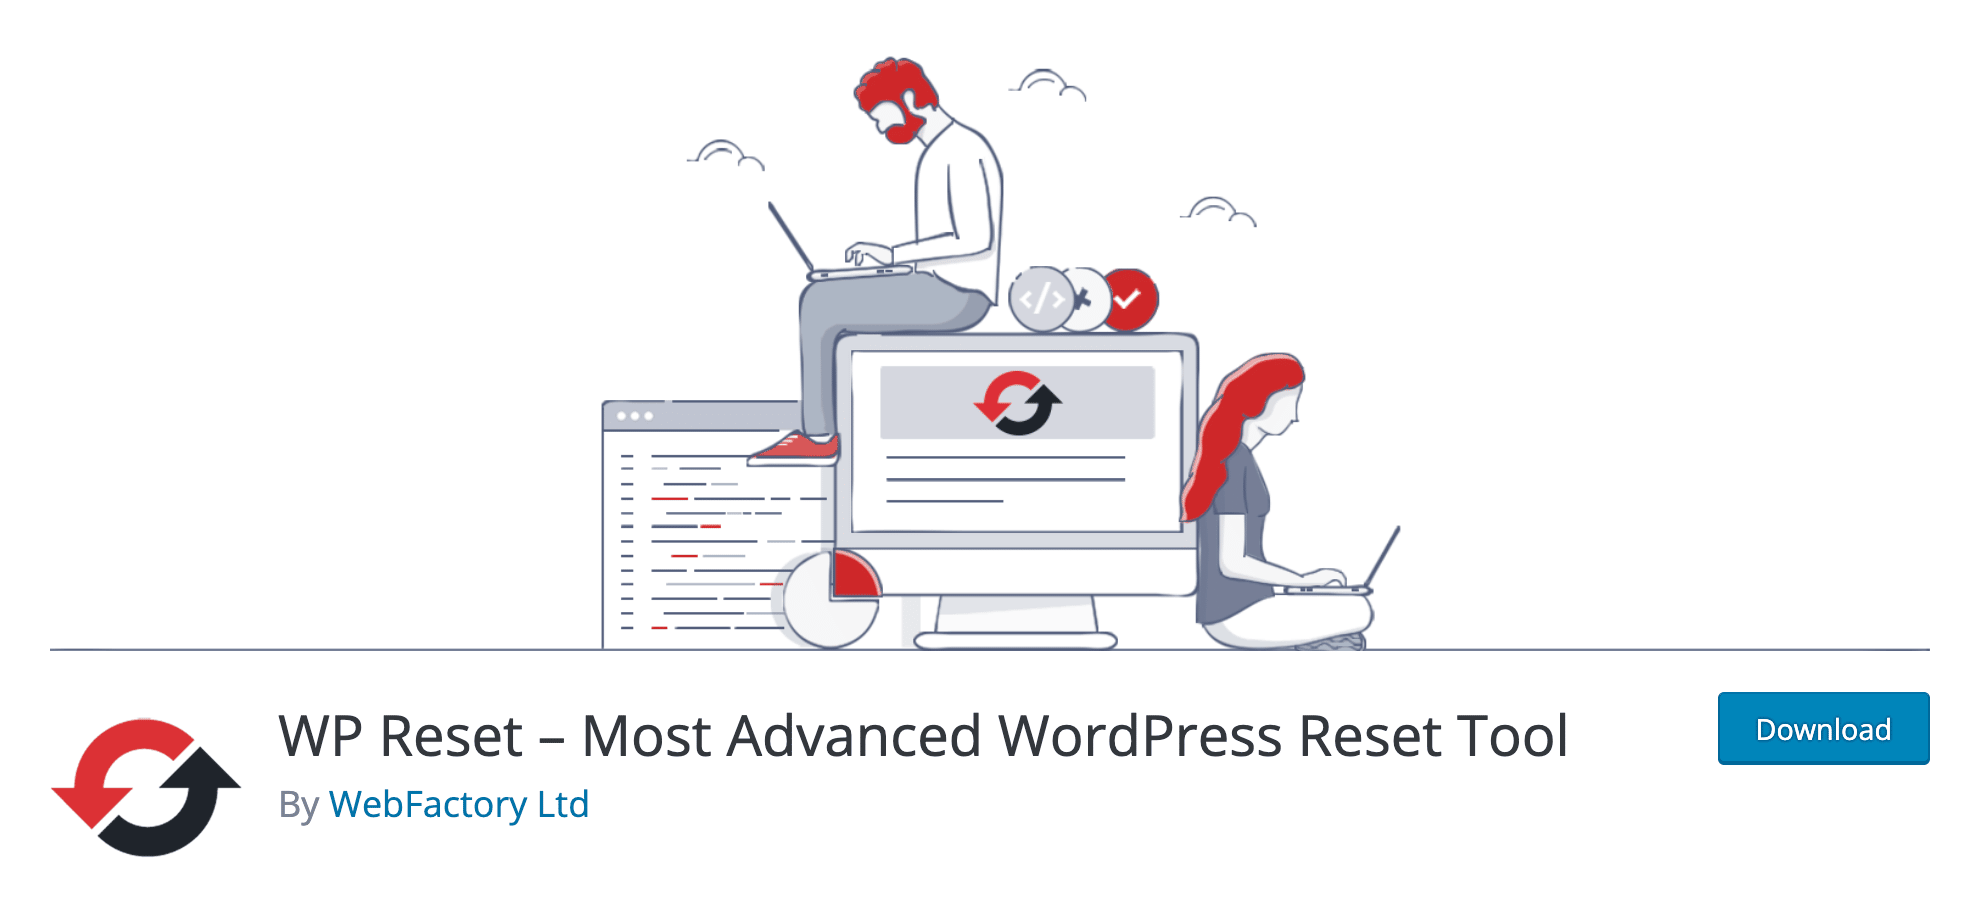 WP Reset is a WordPress plugin to reset a site.